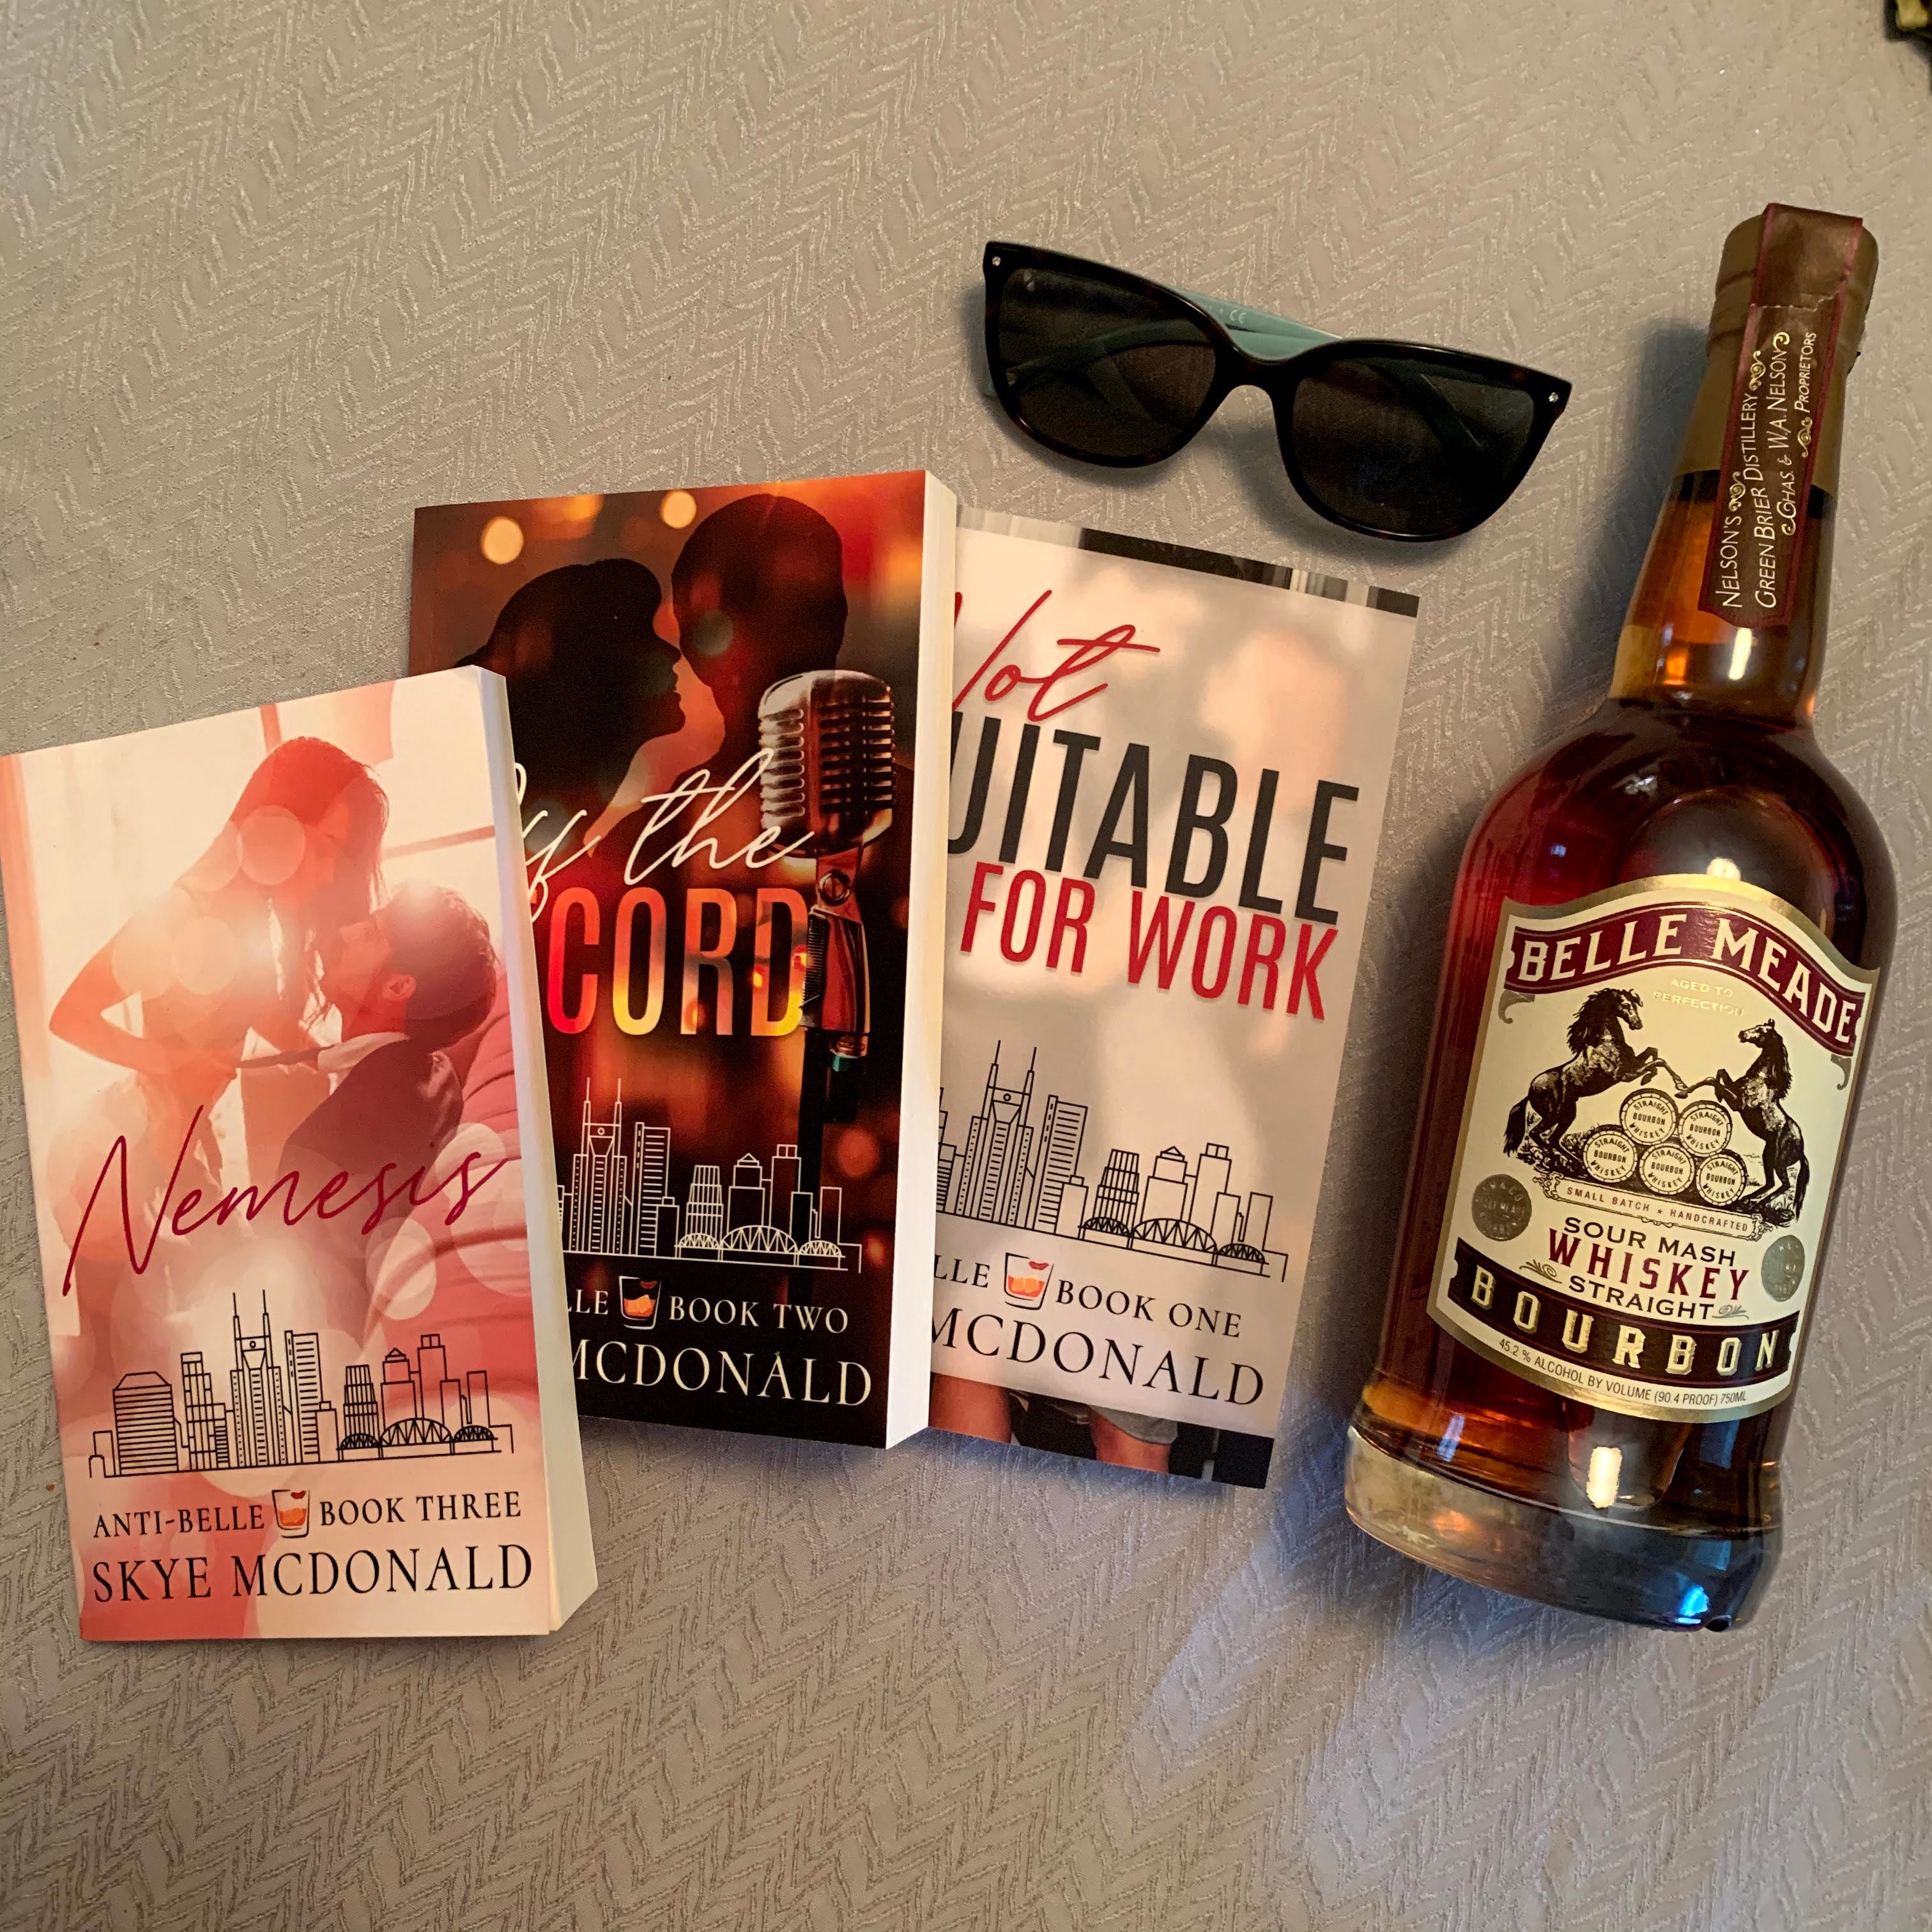 Skye McDonald’s books: Nemesis, Off the Record, and Not Suitable for Work pictured with sunglasses and a bottle of Belle Meade whiskey